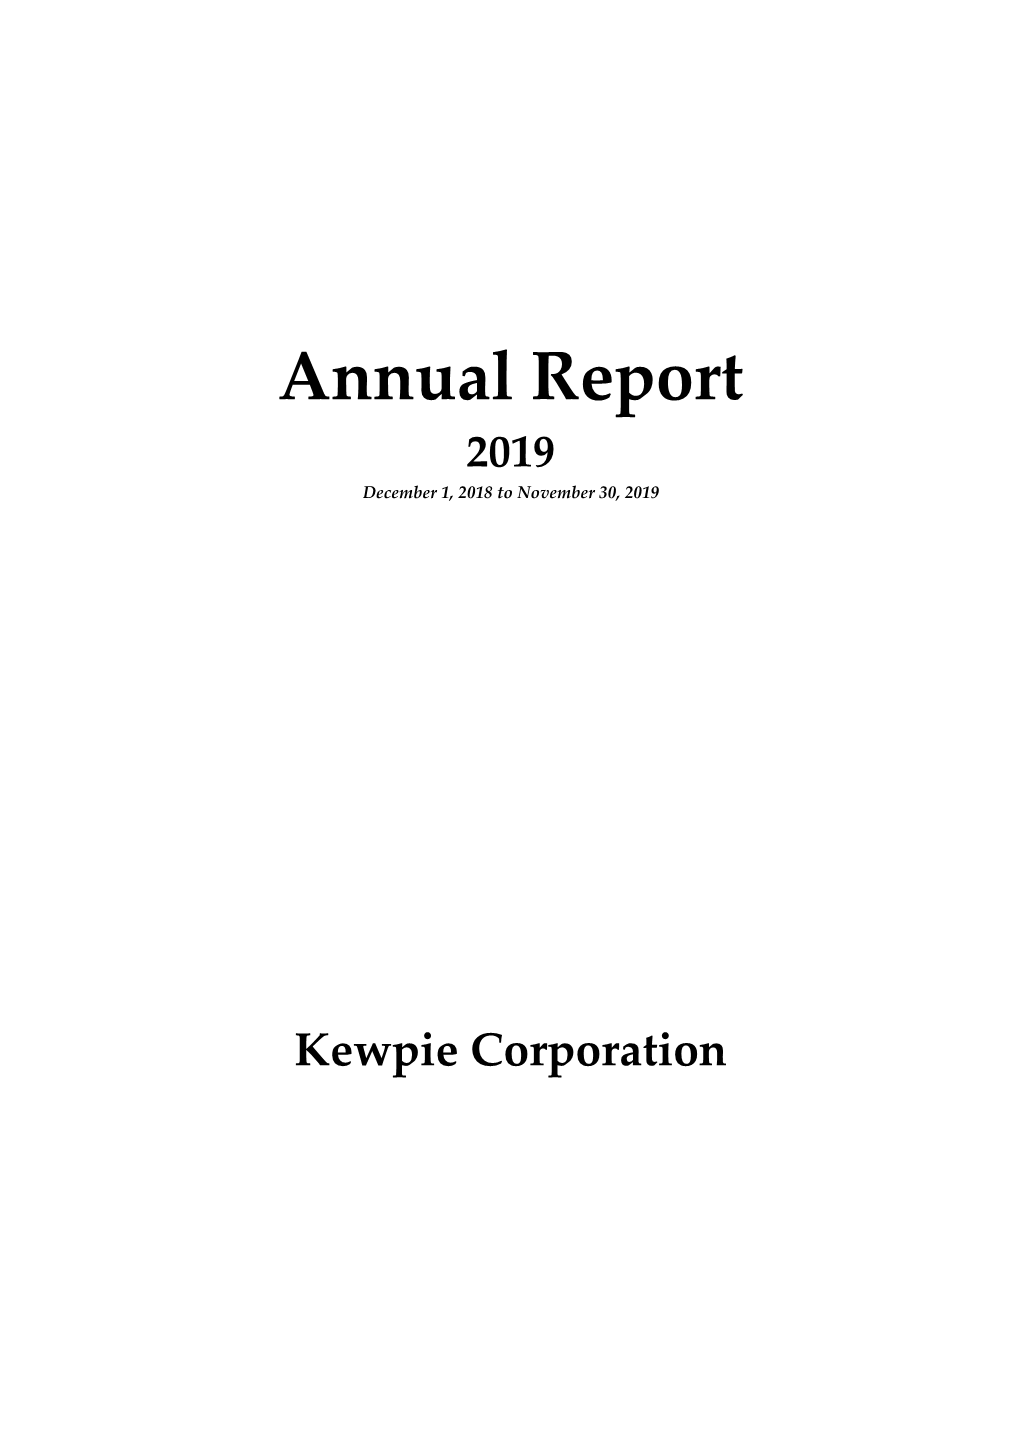 Annual Report 2019 December 1, 2018 to November 30, 2019